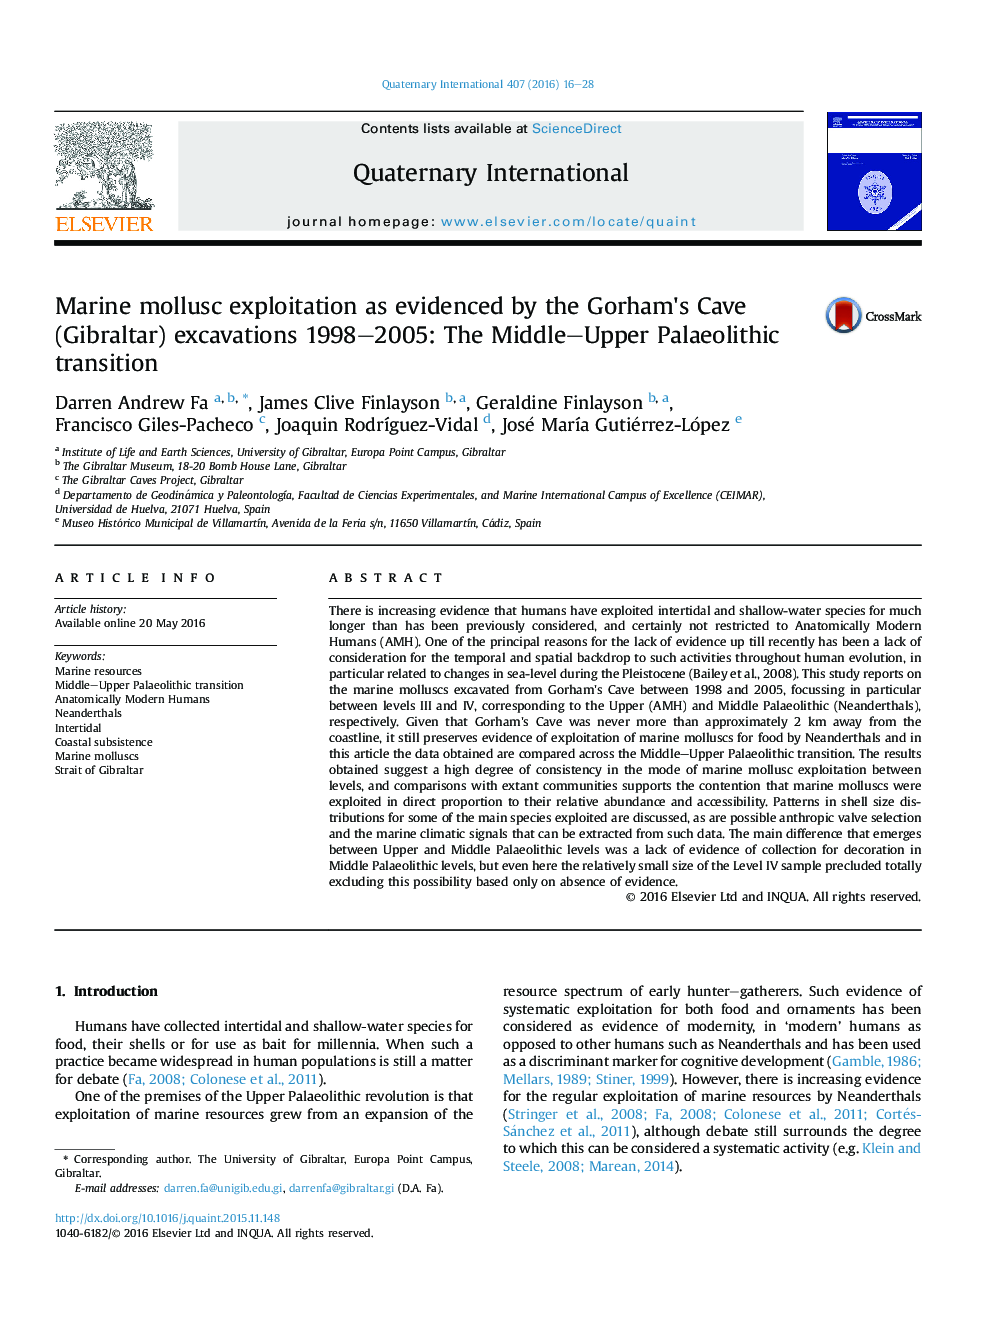 Marine mollusc exploitation as evidenced by the Gorham's Cave (Gibraltar) excavations 1998–2005: The Middle–Upper Palaeolithic transition